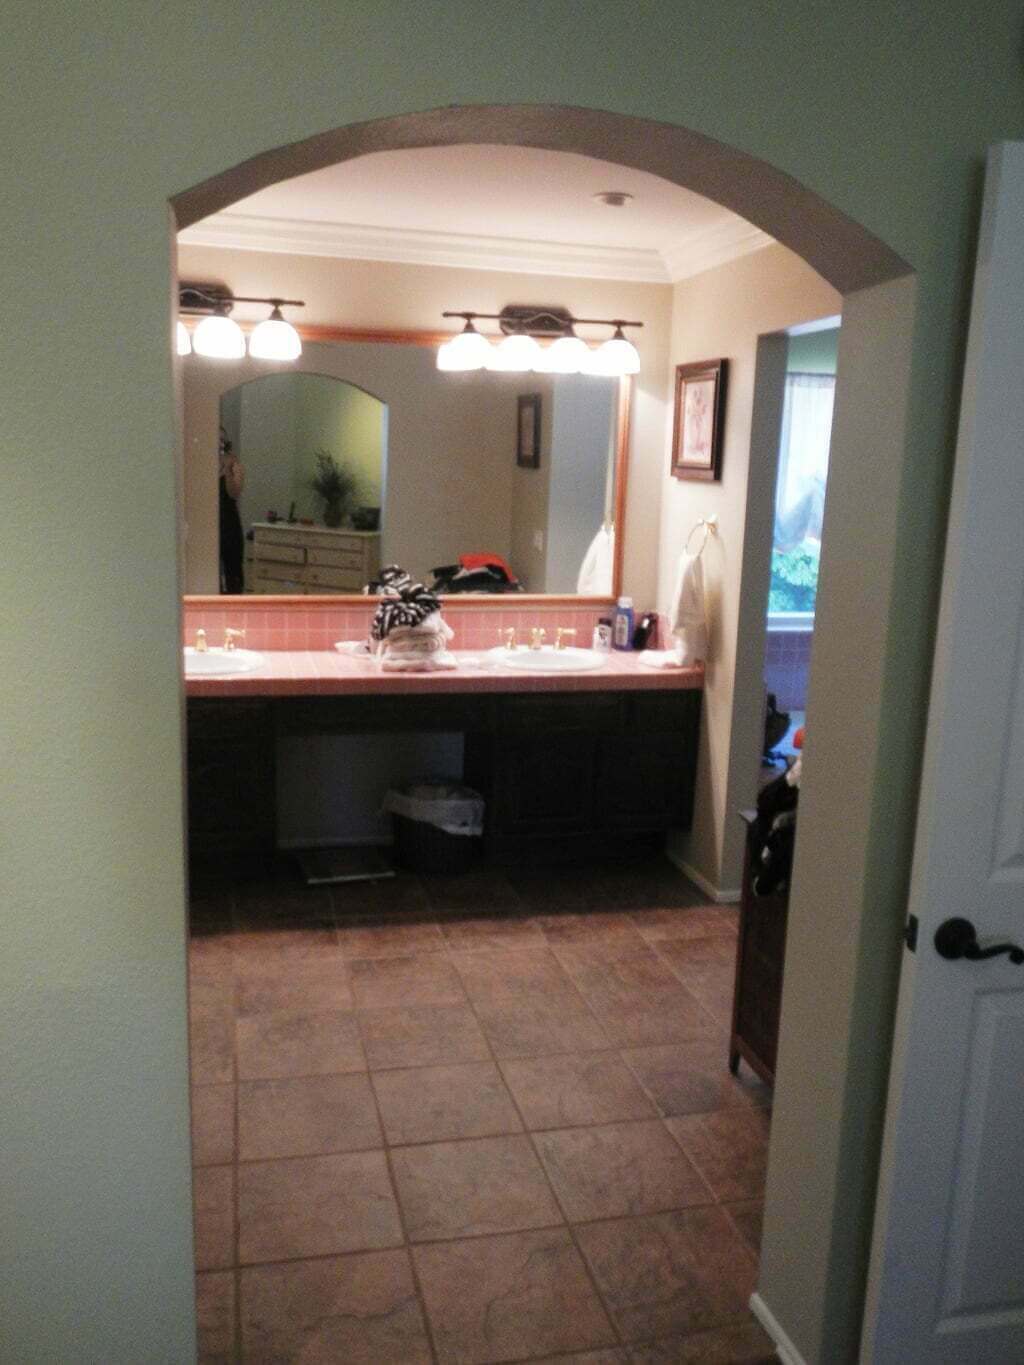 double sink vanity before, old with pink tile